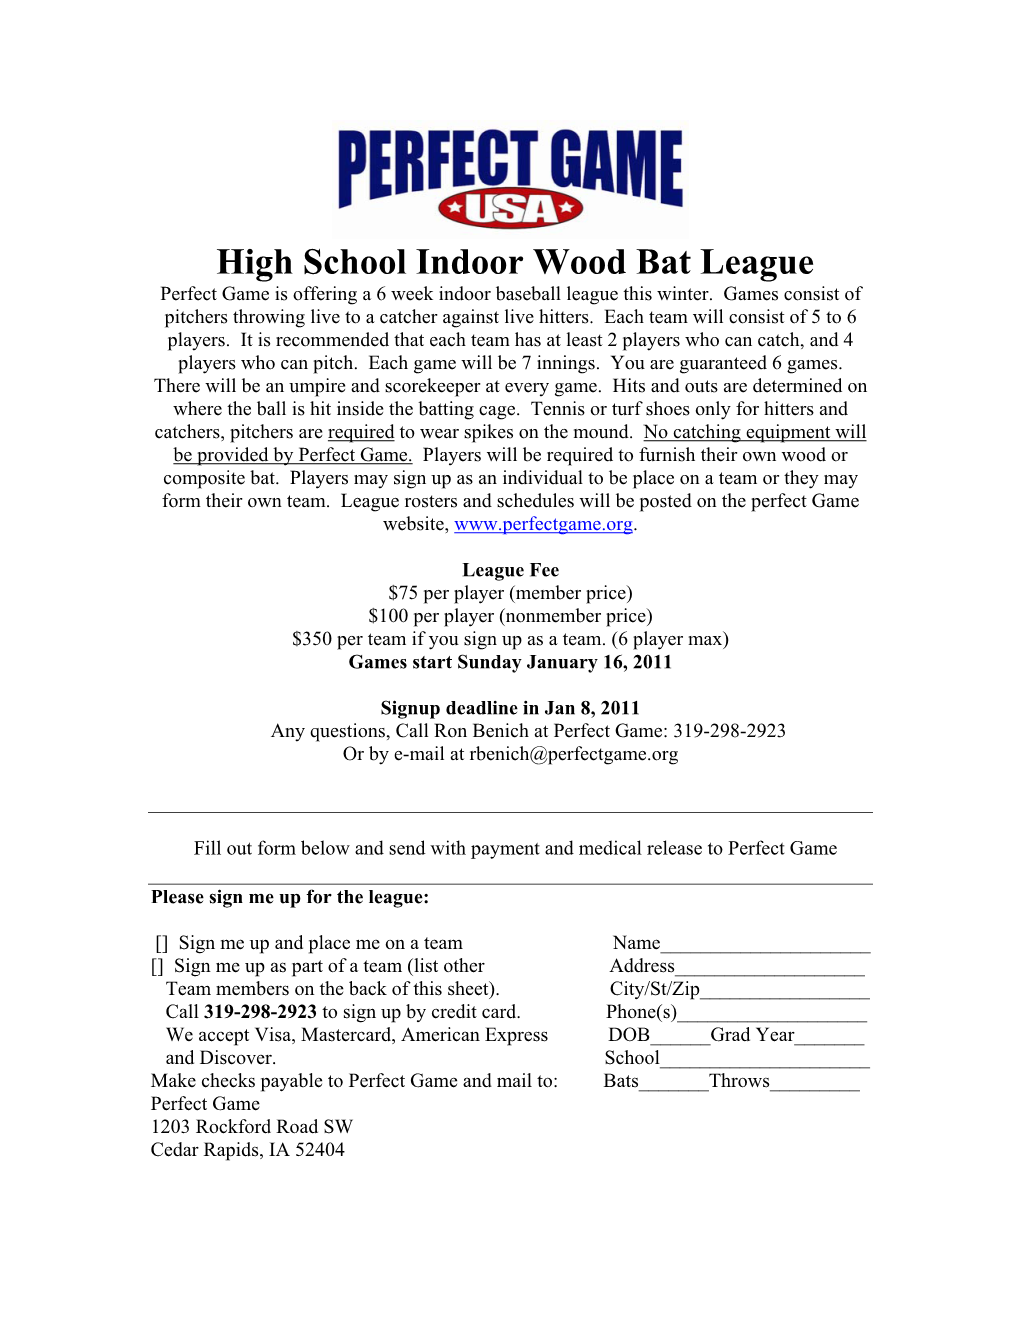 High School Indoor Wood Bat League Perfect Game Is Offering a 6 Week Indoor Baseball League This Winter